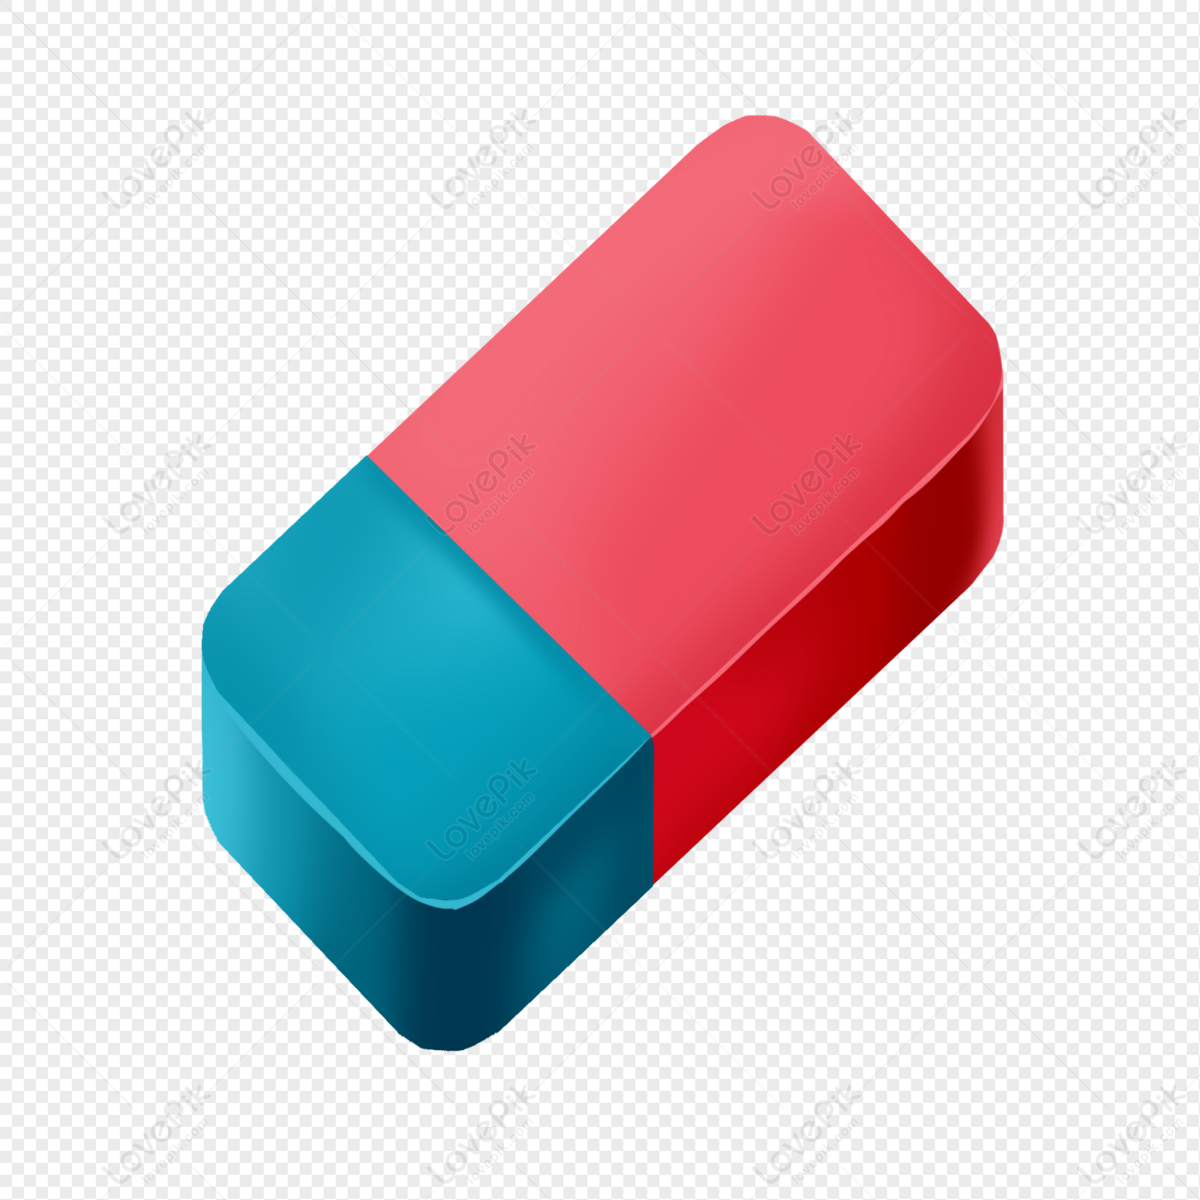 Red And Blue Eraser PNG Transparent Background And Clipart Image For Free  Download - Lovepik | 401556220